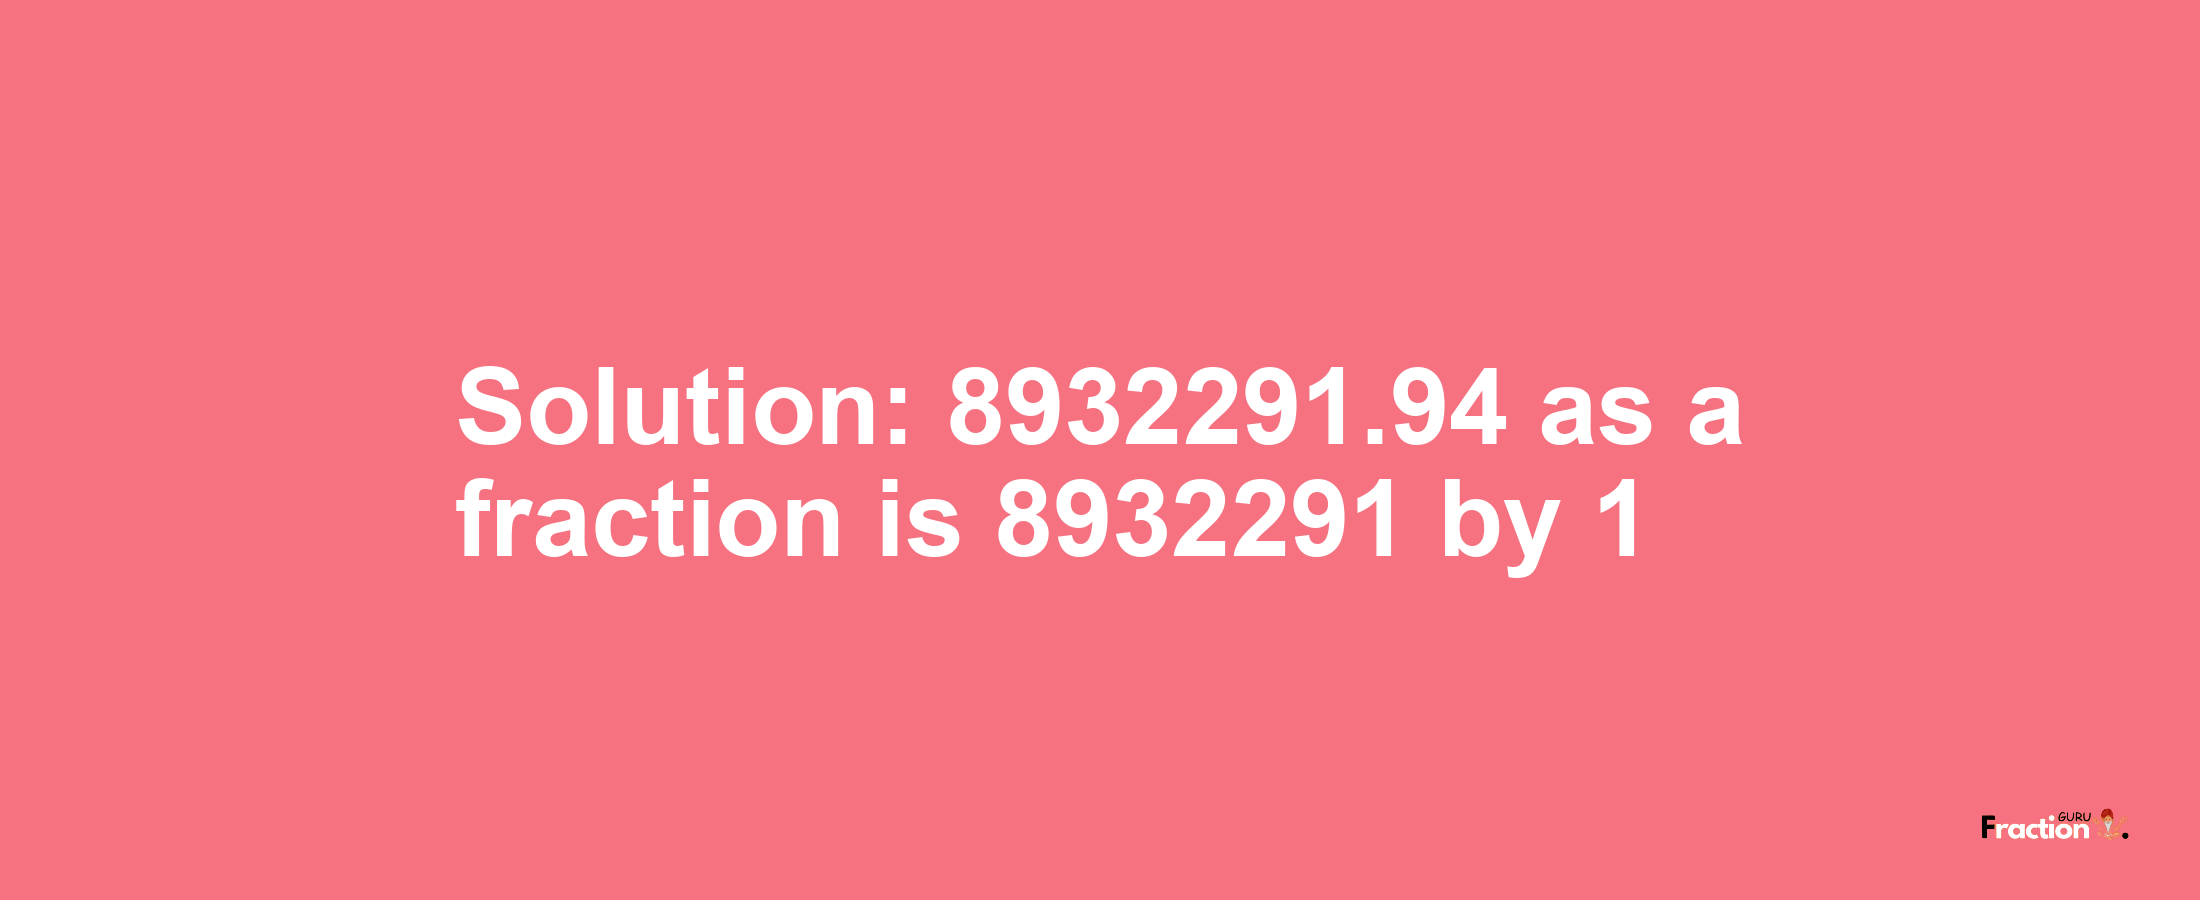 Solution:8932291.94 as a fraction is 8932291/1